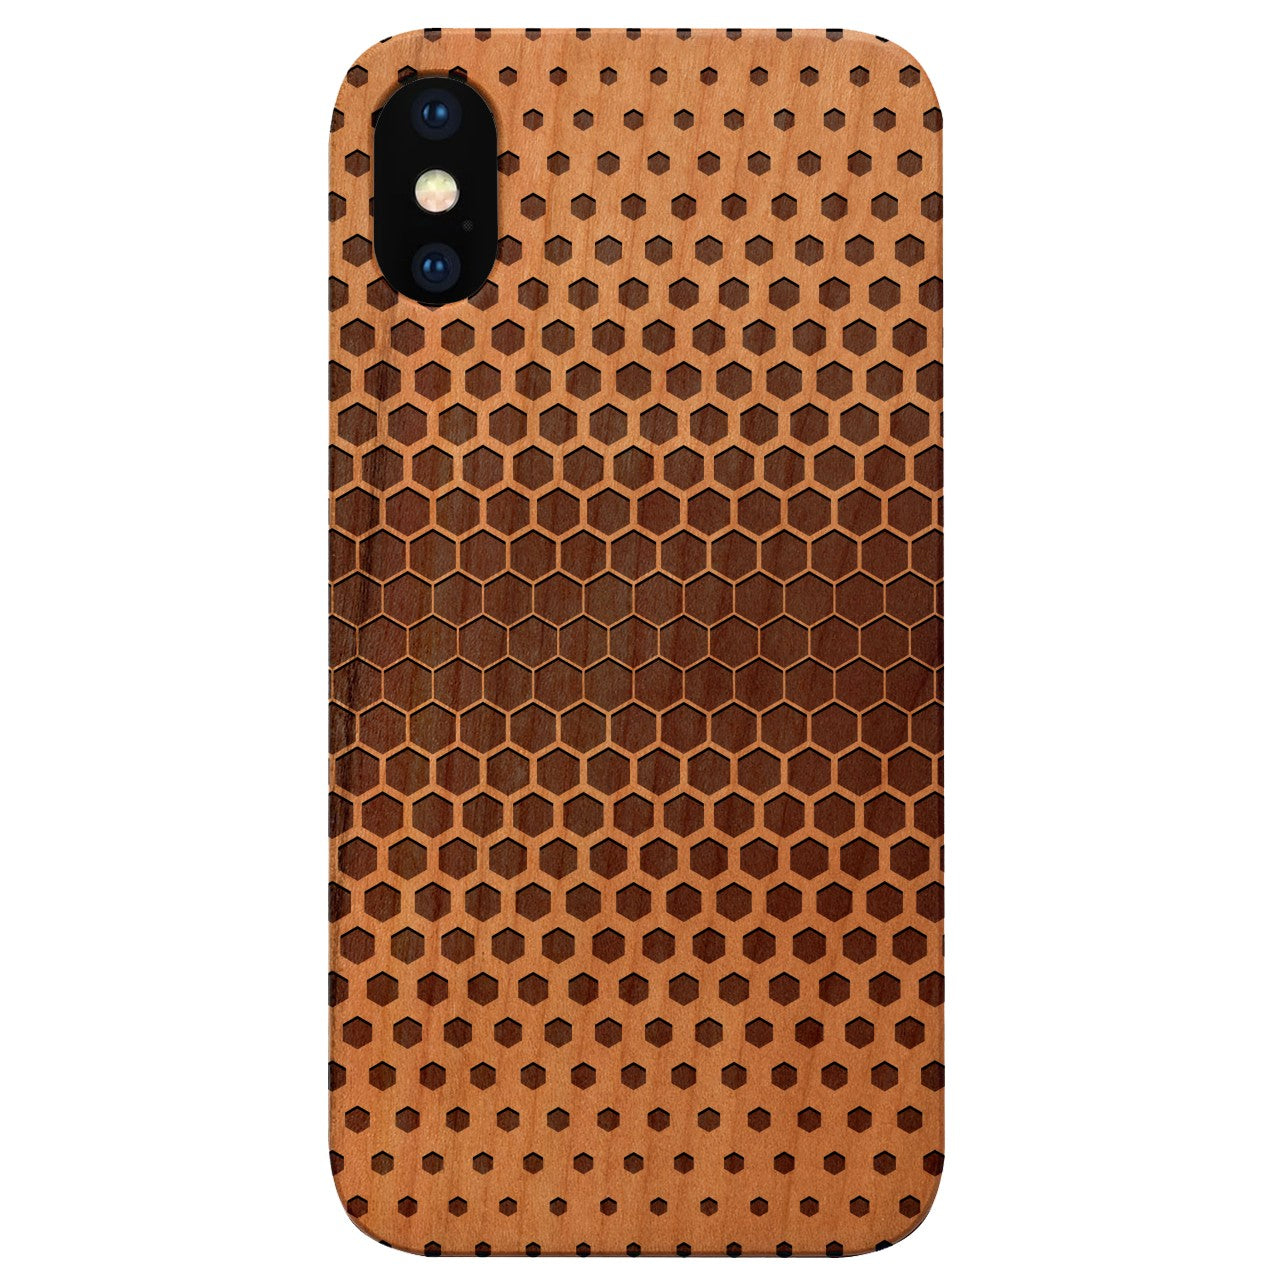  Hexagon Pattern 2 - Engraved - Wooden Phone Case - IPhone 13 Models